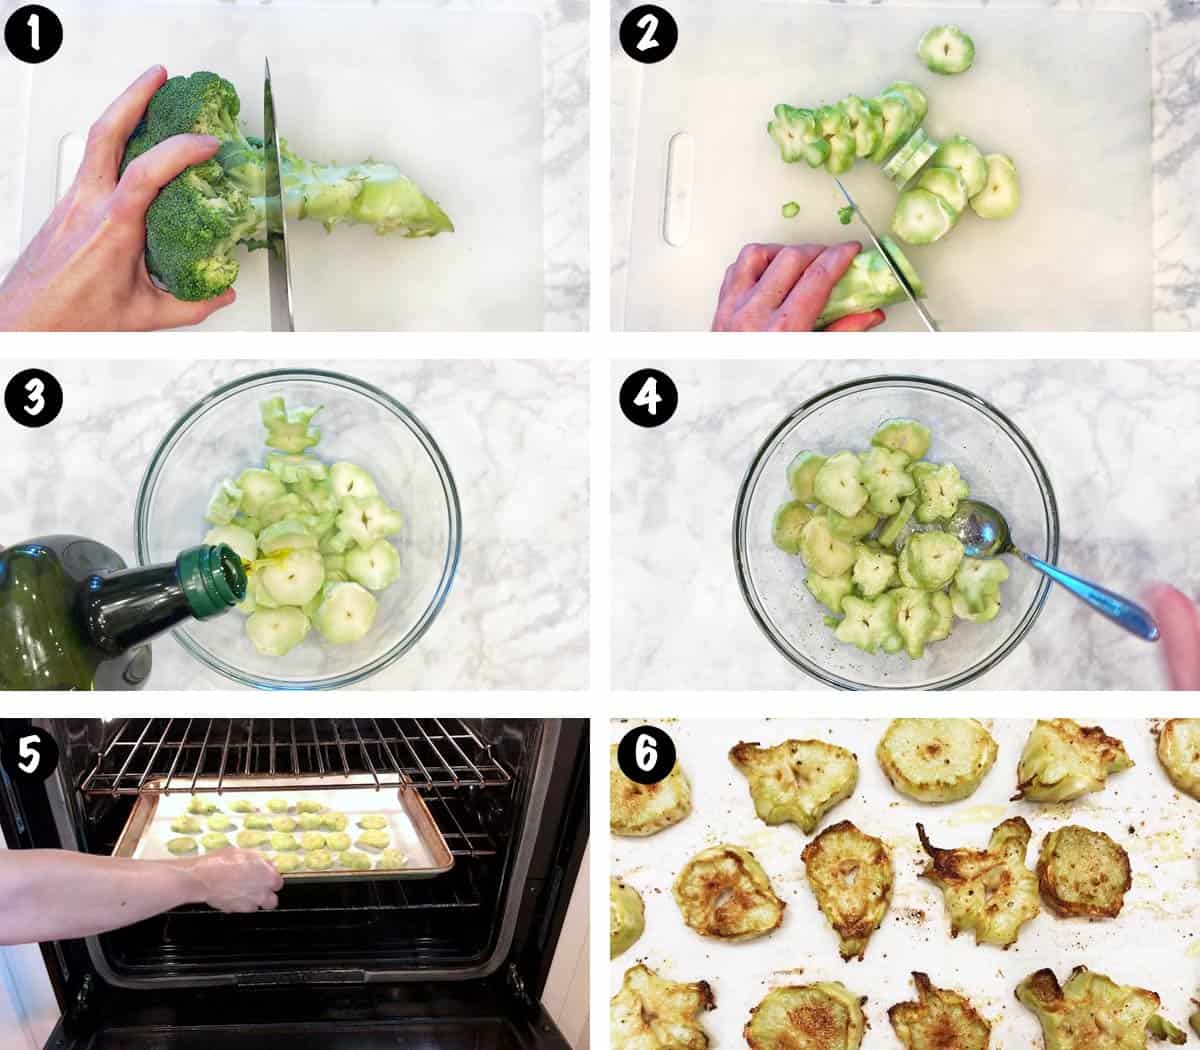 A six-photo collage showing the steps for cooking broccoli stalks. 